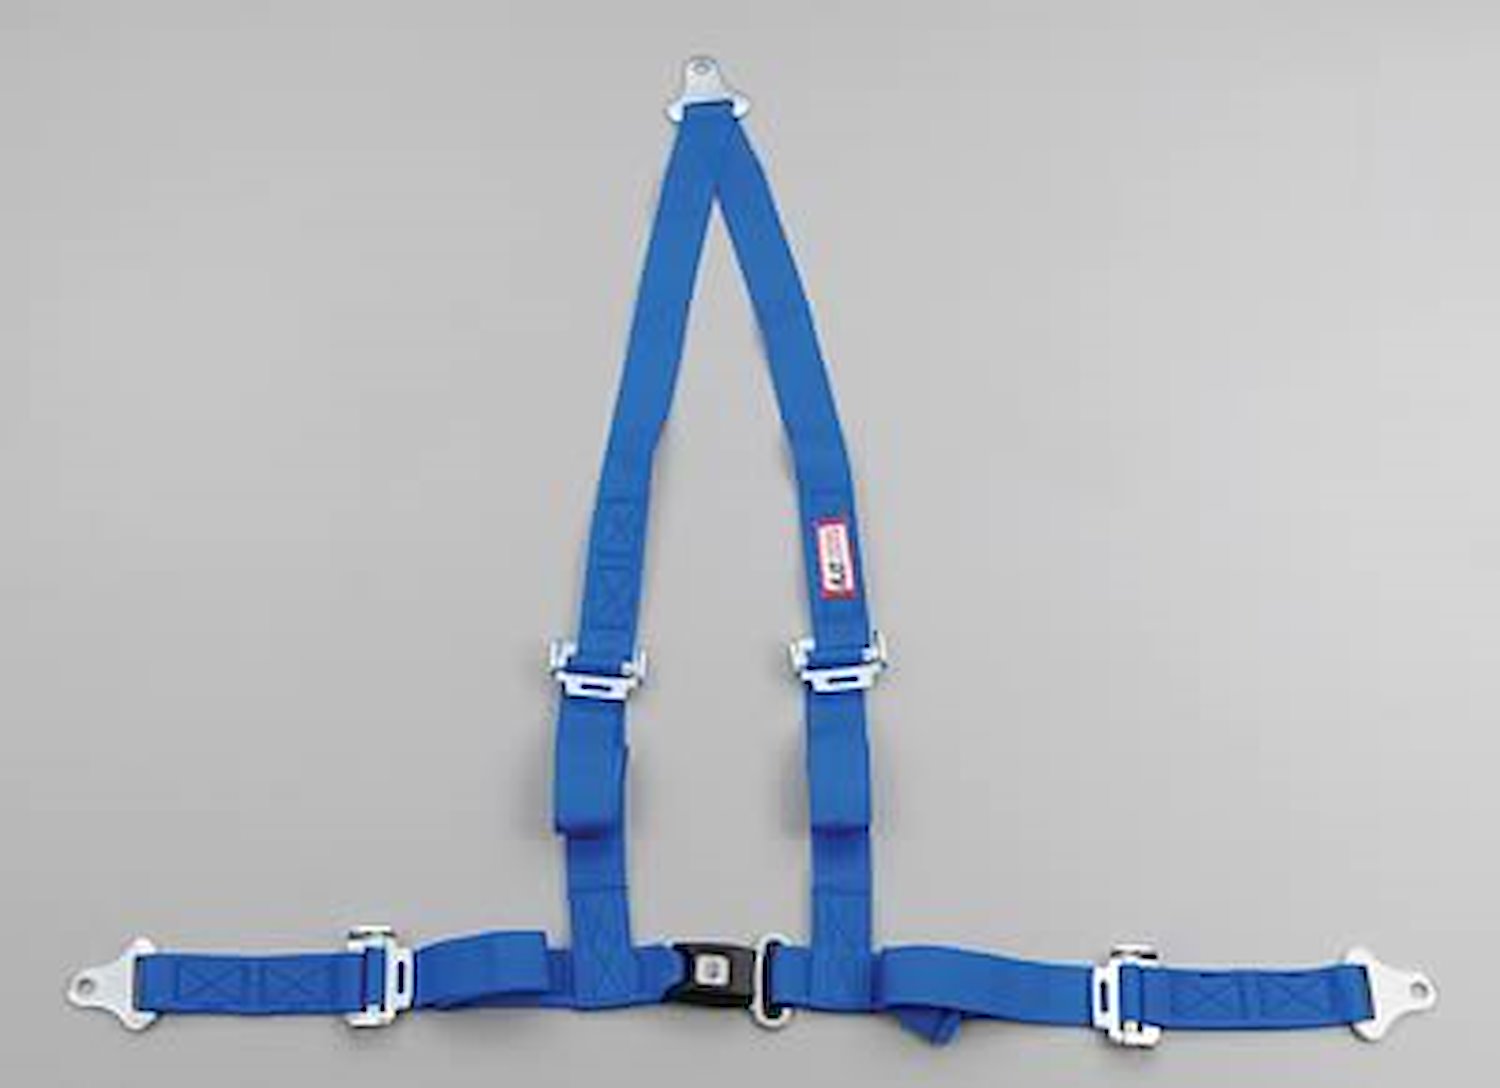 NON-SFI B&T HARNESS 2 PULL UP Lap Belt 2 S. H. V ROLL BAR Mount ALL SNAP ENDS w/STERNUM STRAP BLUE